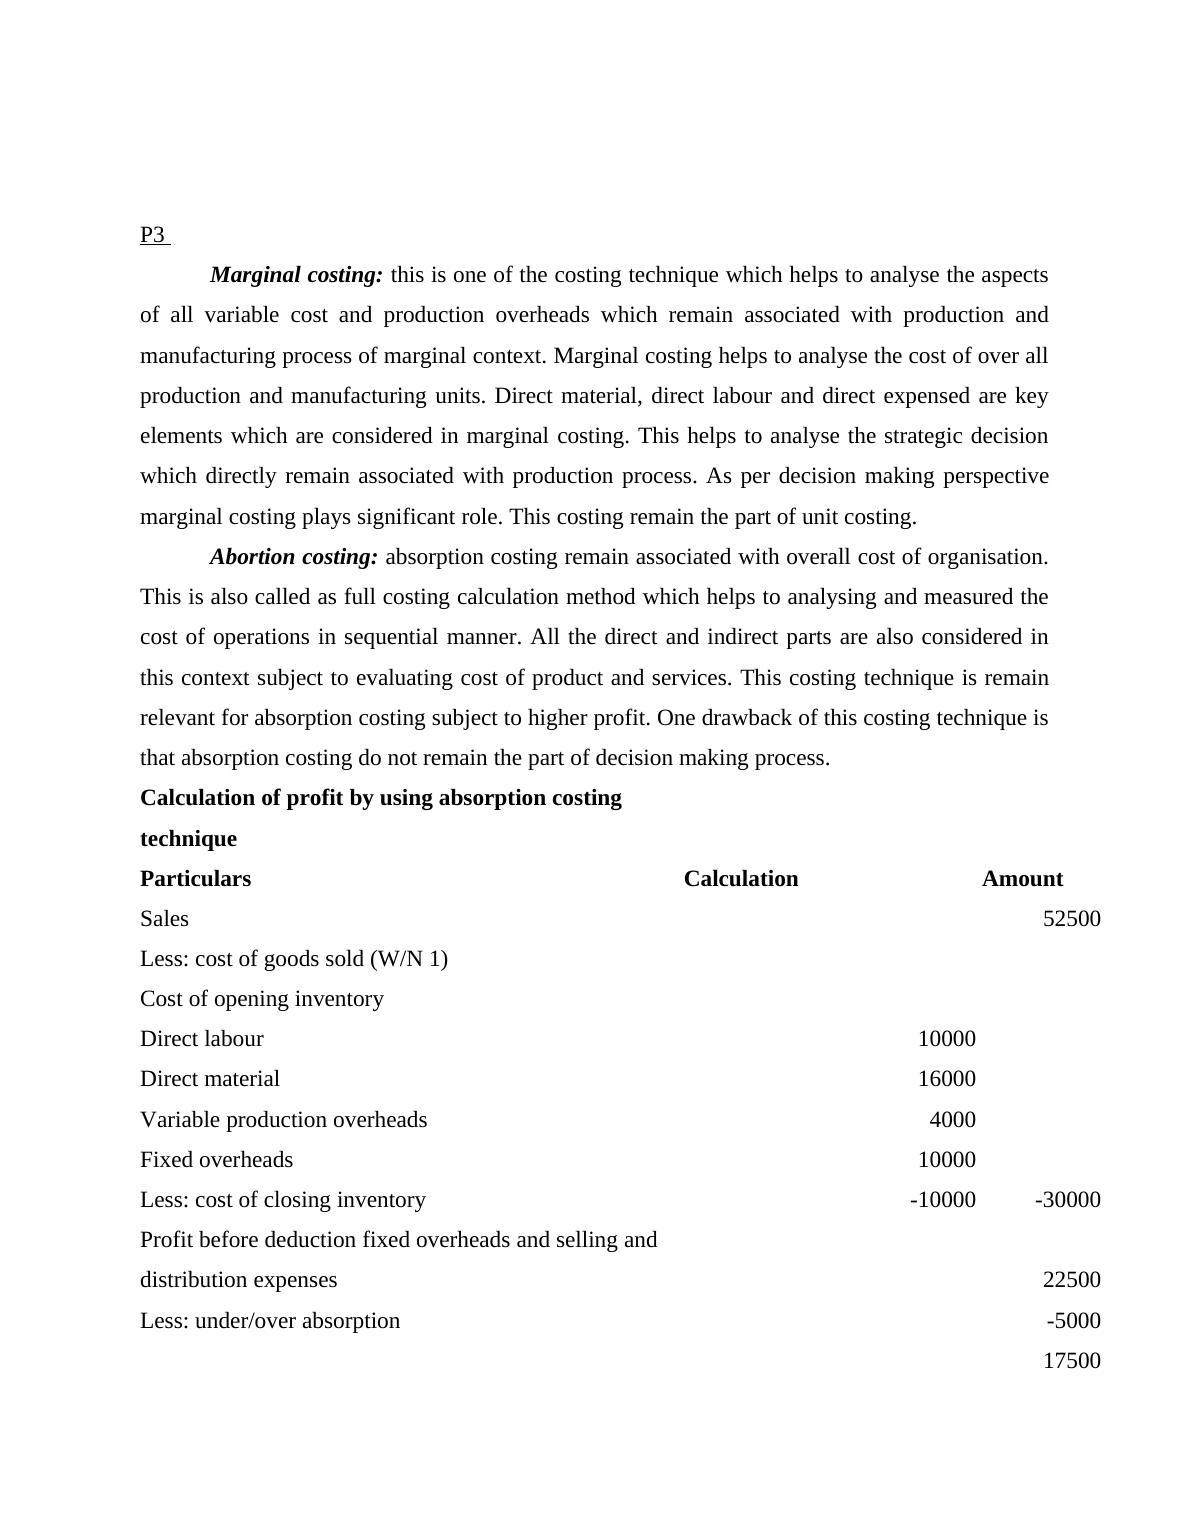 Assignment on Marginal Costing_2